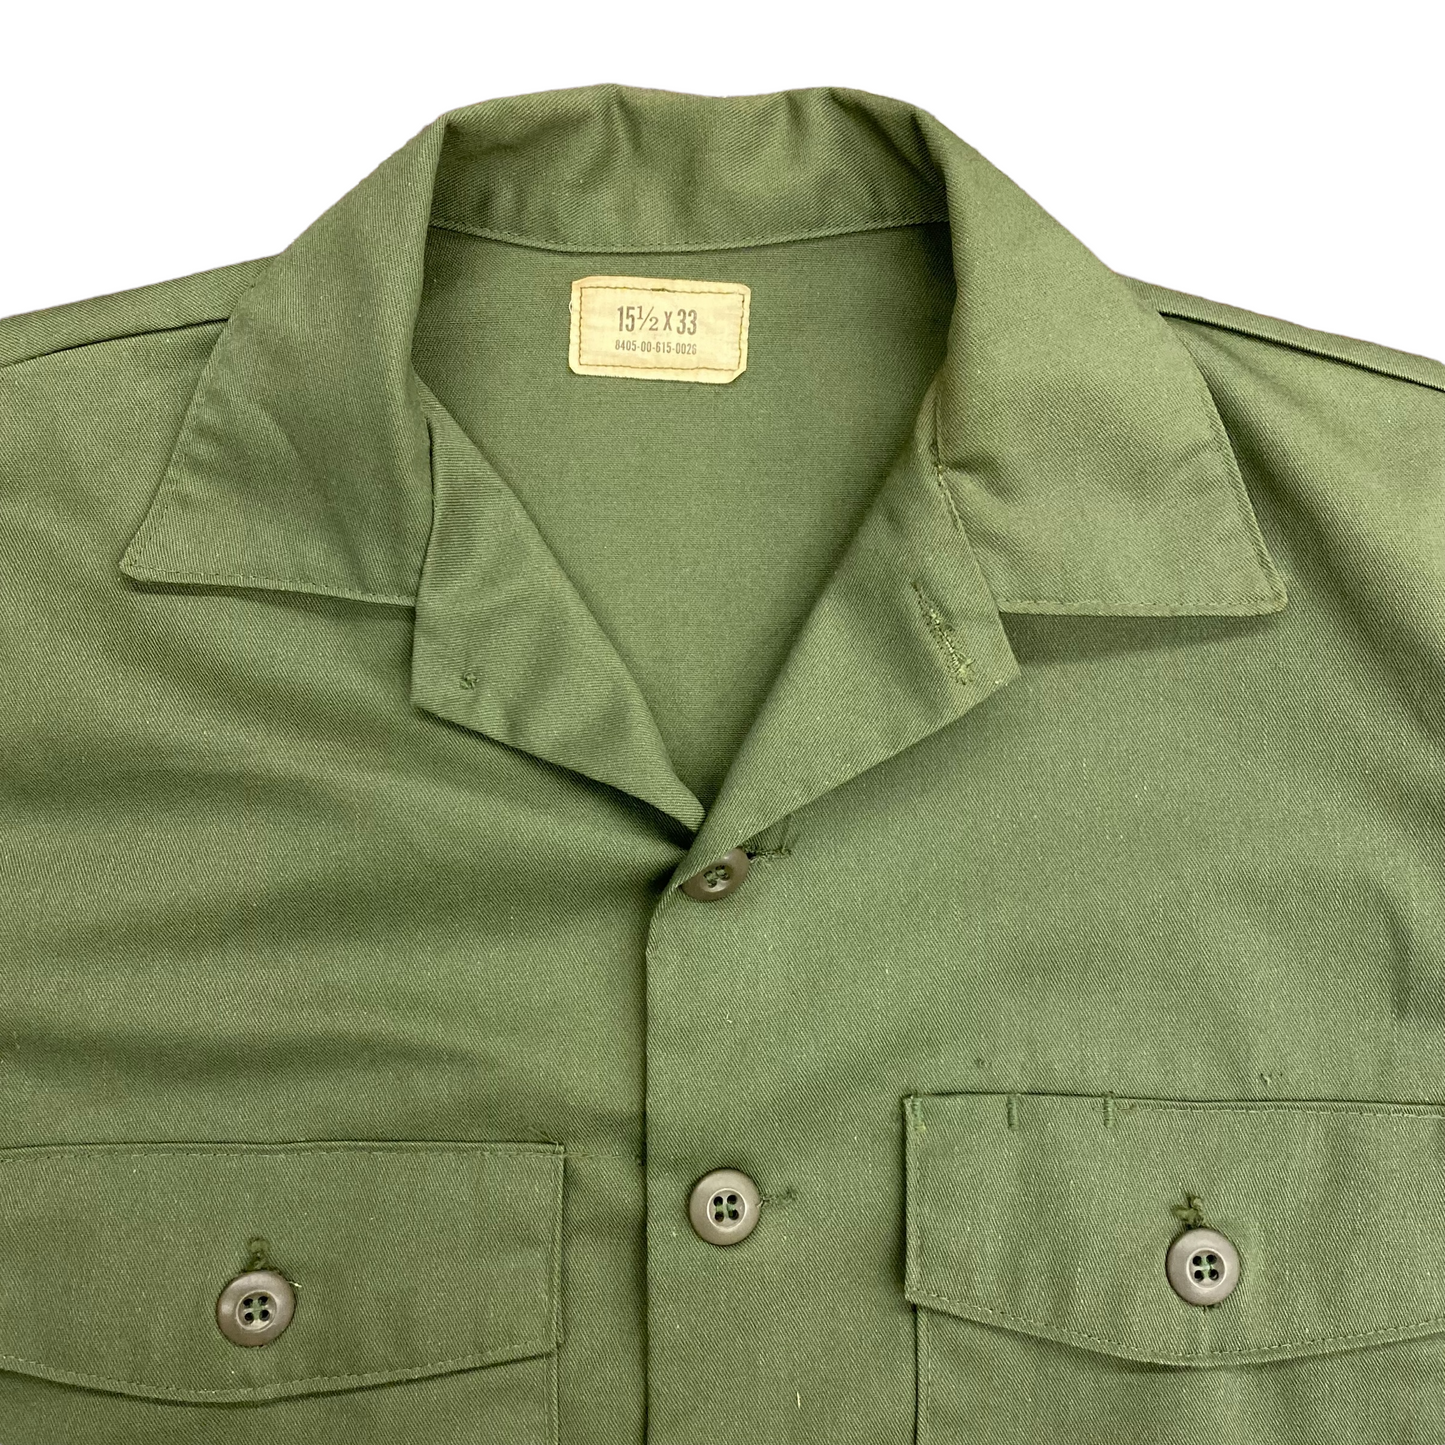 Vintage Military Issue Green Button Up - Size Medium/Large